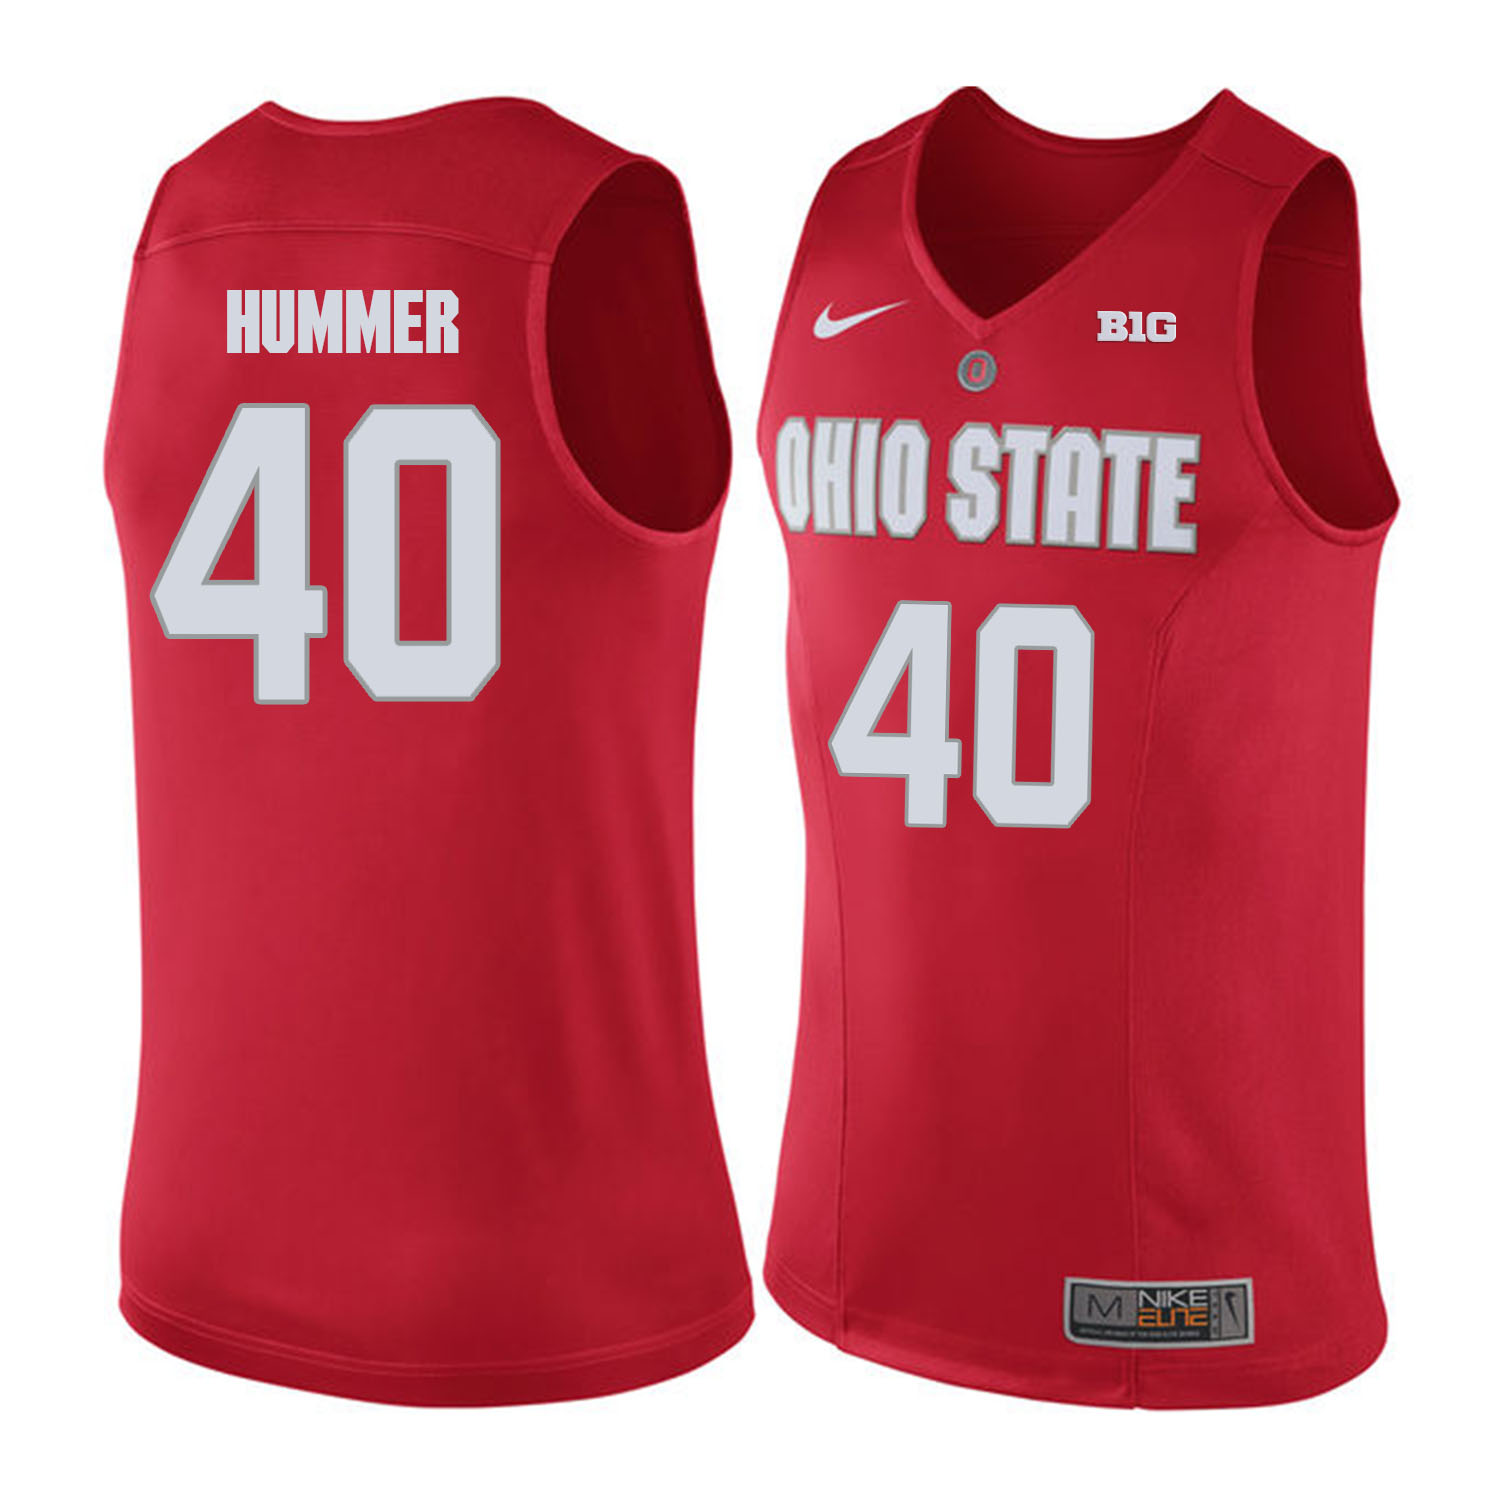 Ohio State Buckeyes 40 Danny Hummer Red College Basketball Jersey - Click Image to Close